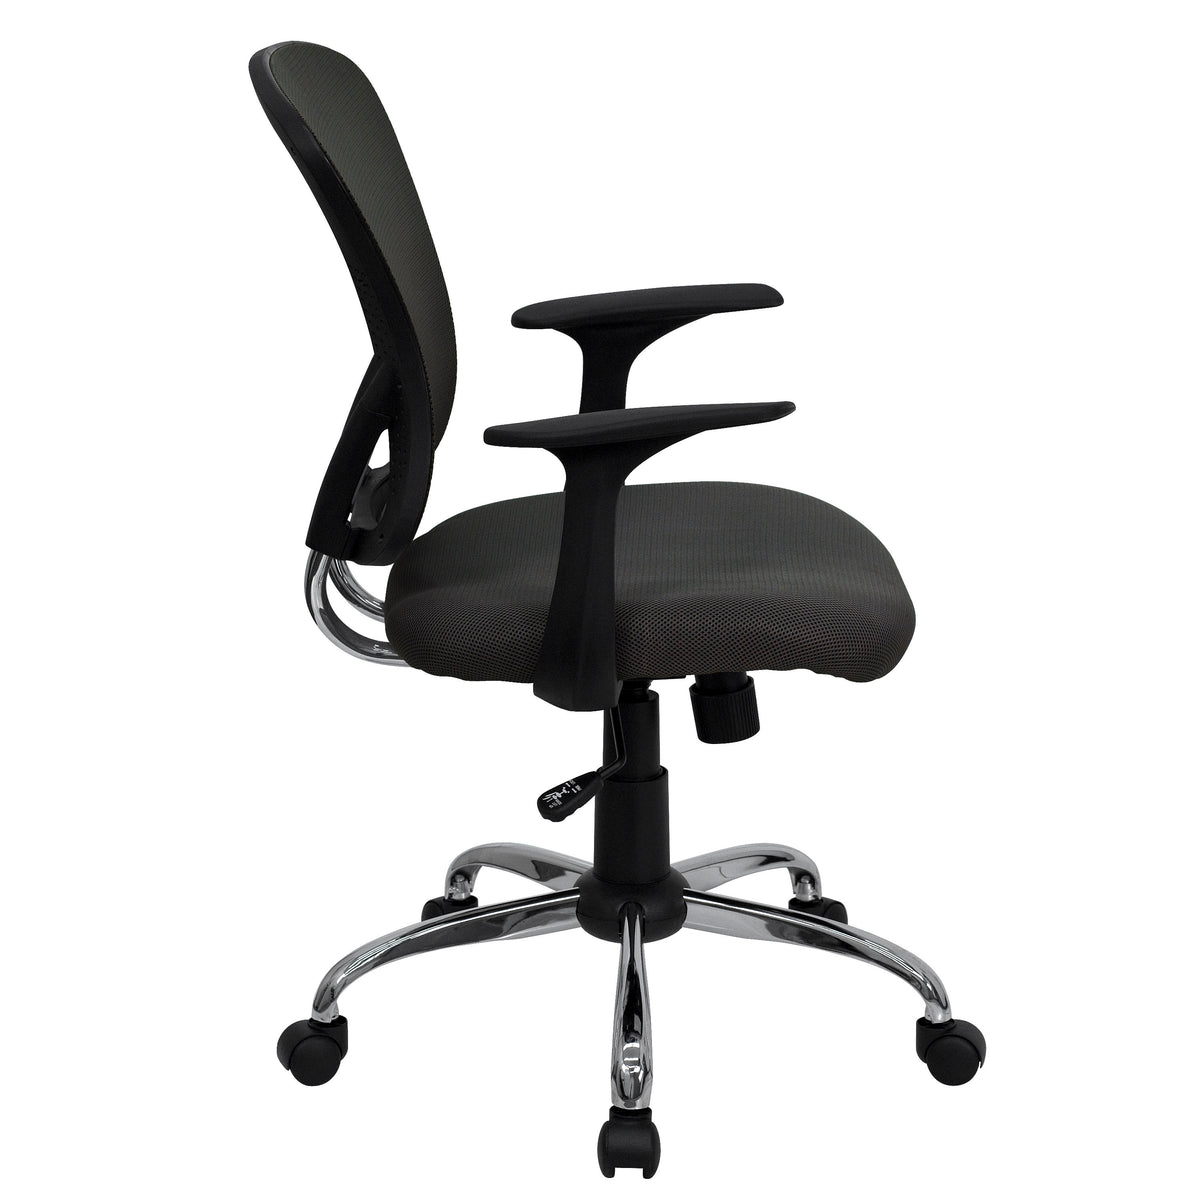 Dark Gray |#| Mid-Back Dark Gray Mesh Swivel Task Office Chair with Chrome Base and Arms